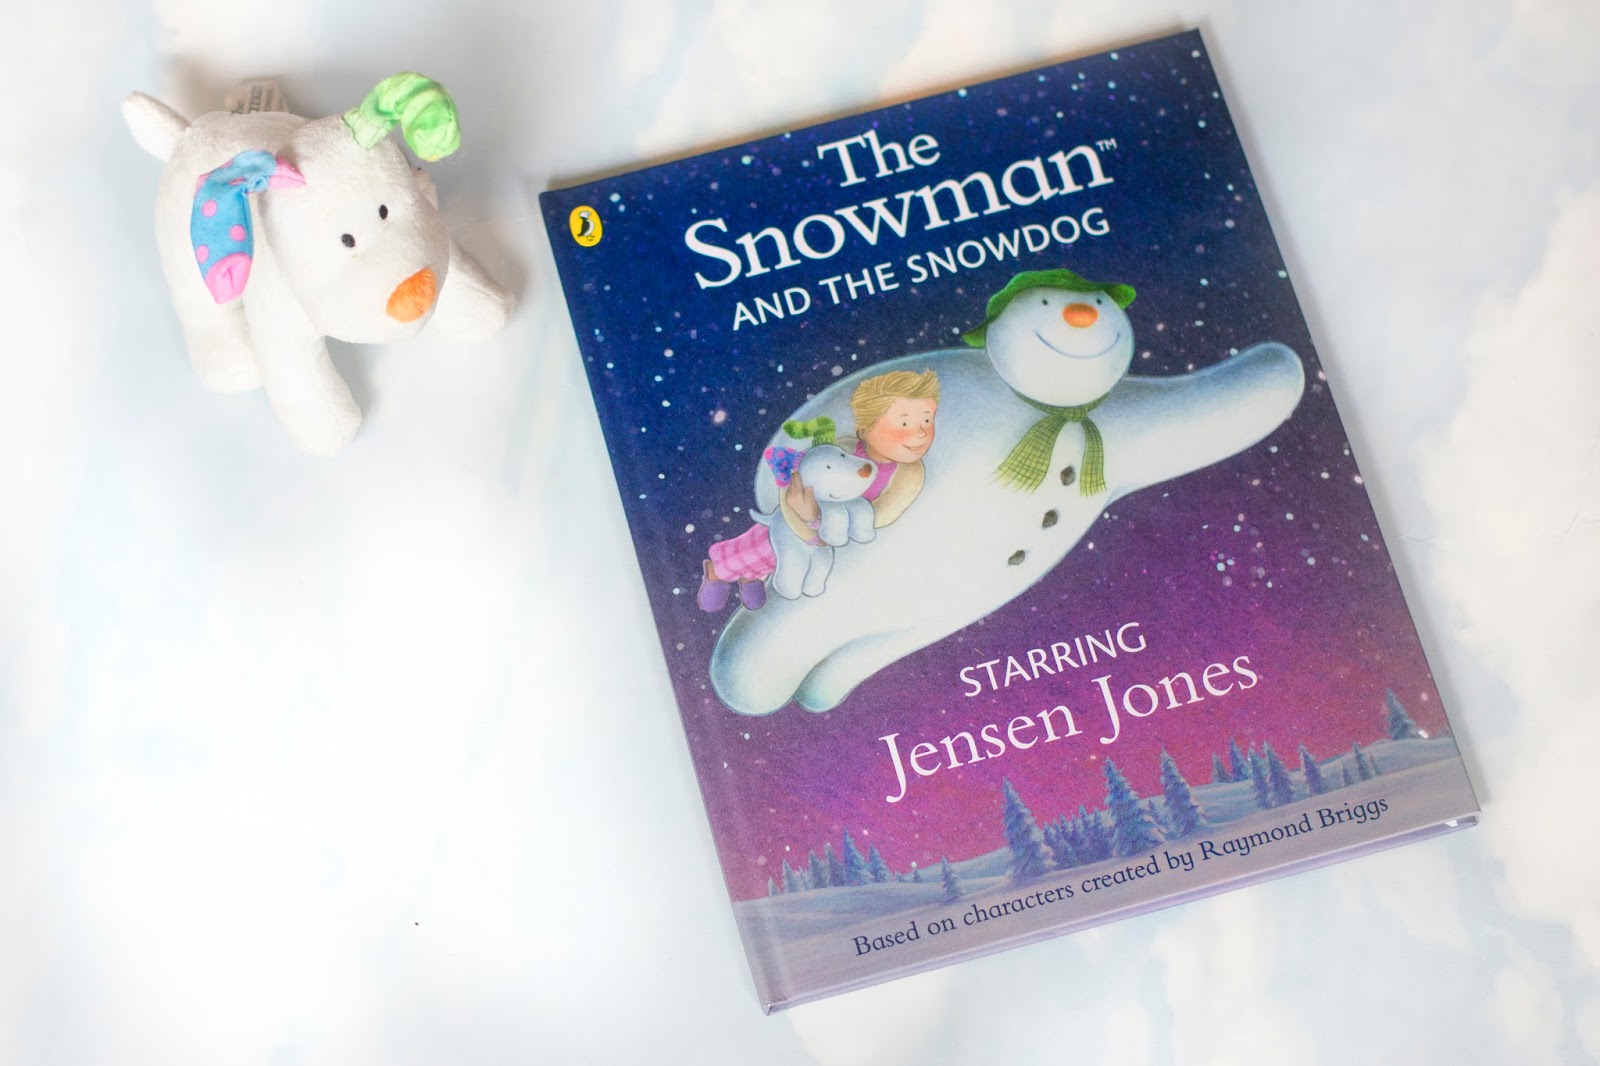 THE SNOWMAN AND THE SNOWDOG: STARRING JENSEN JONES [REVIEW]